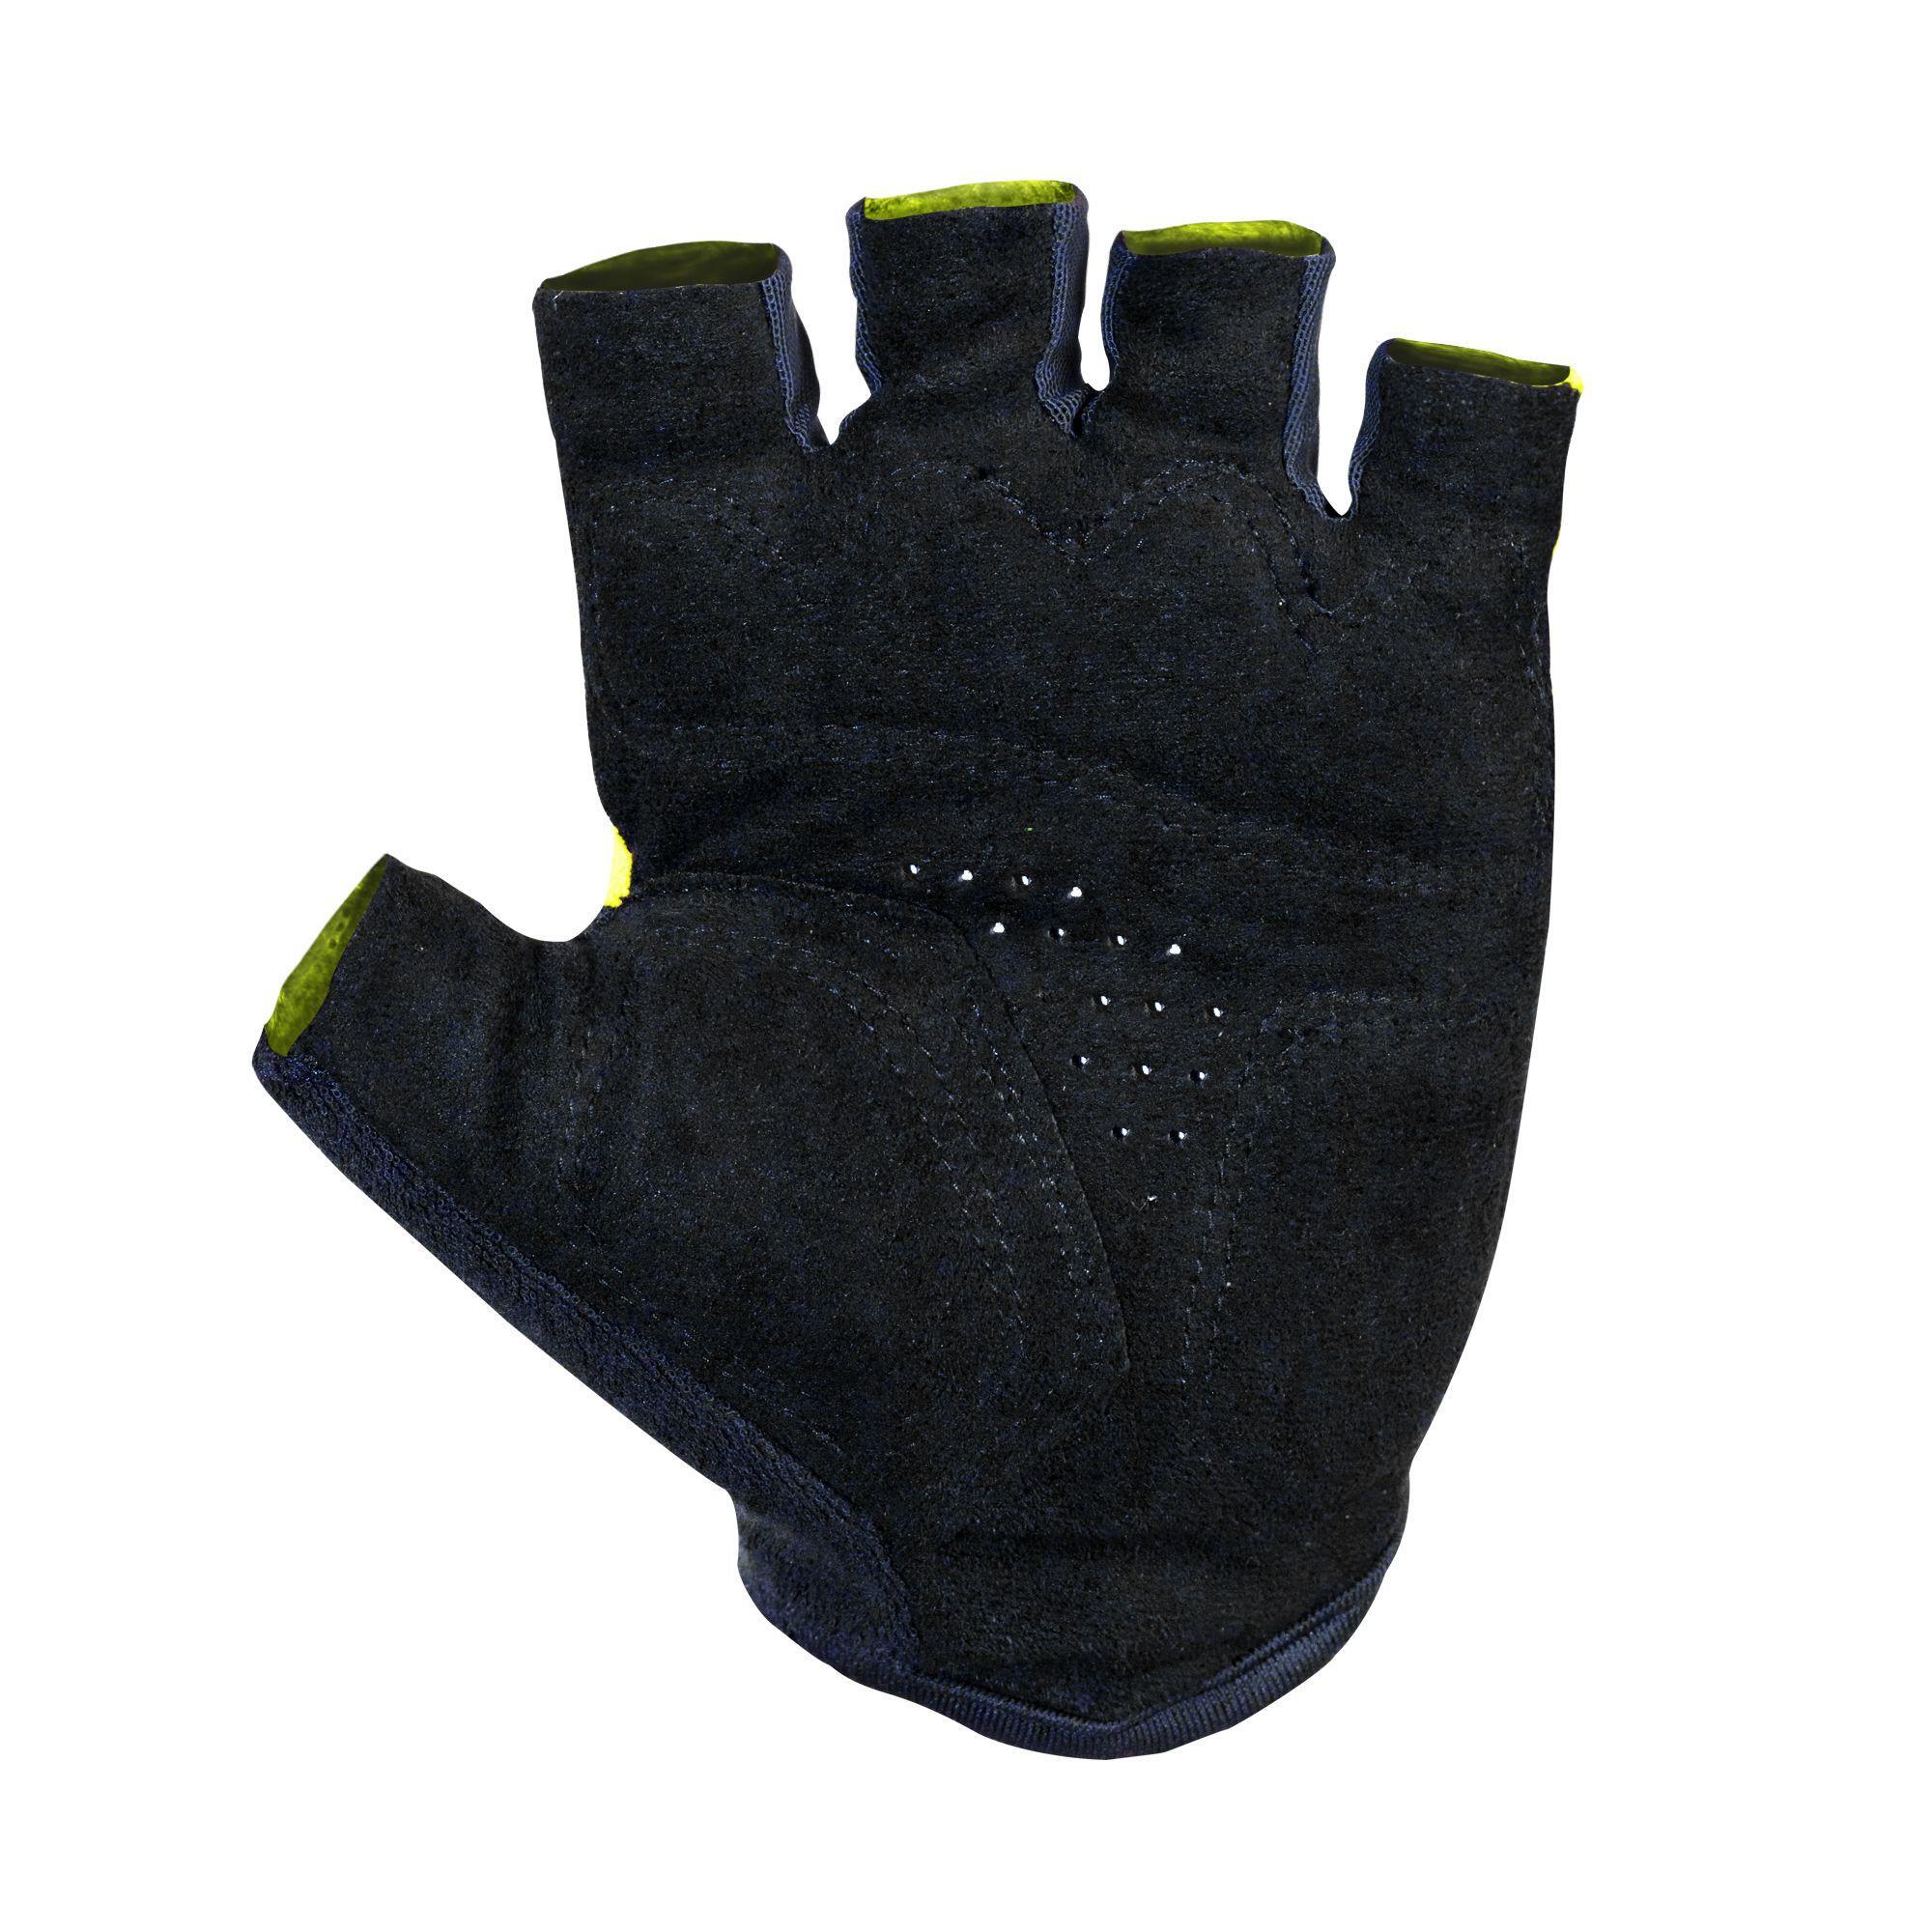 Road Cycling Gloves 500 - Neon Yellow 3/6